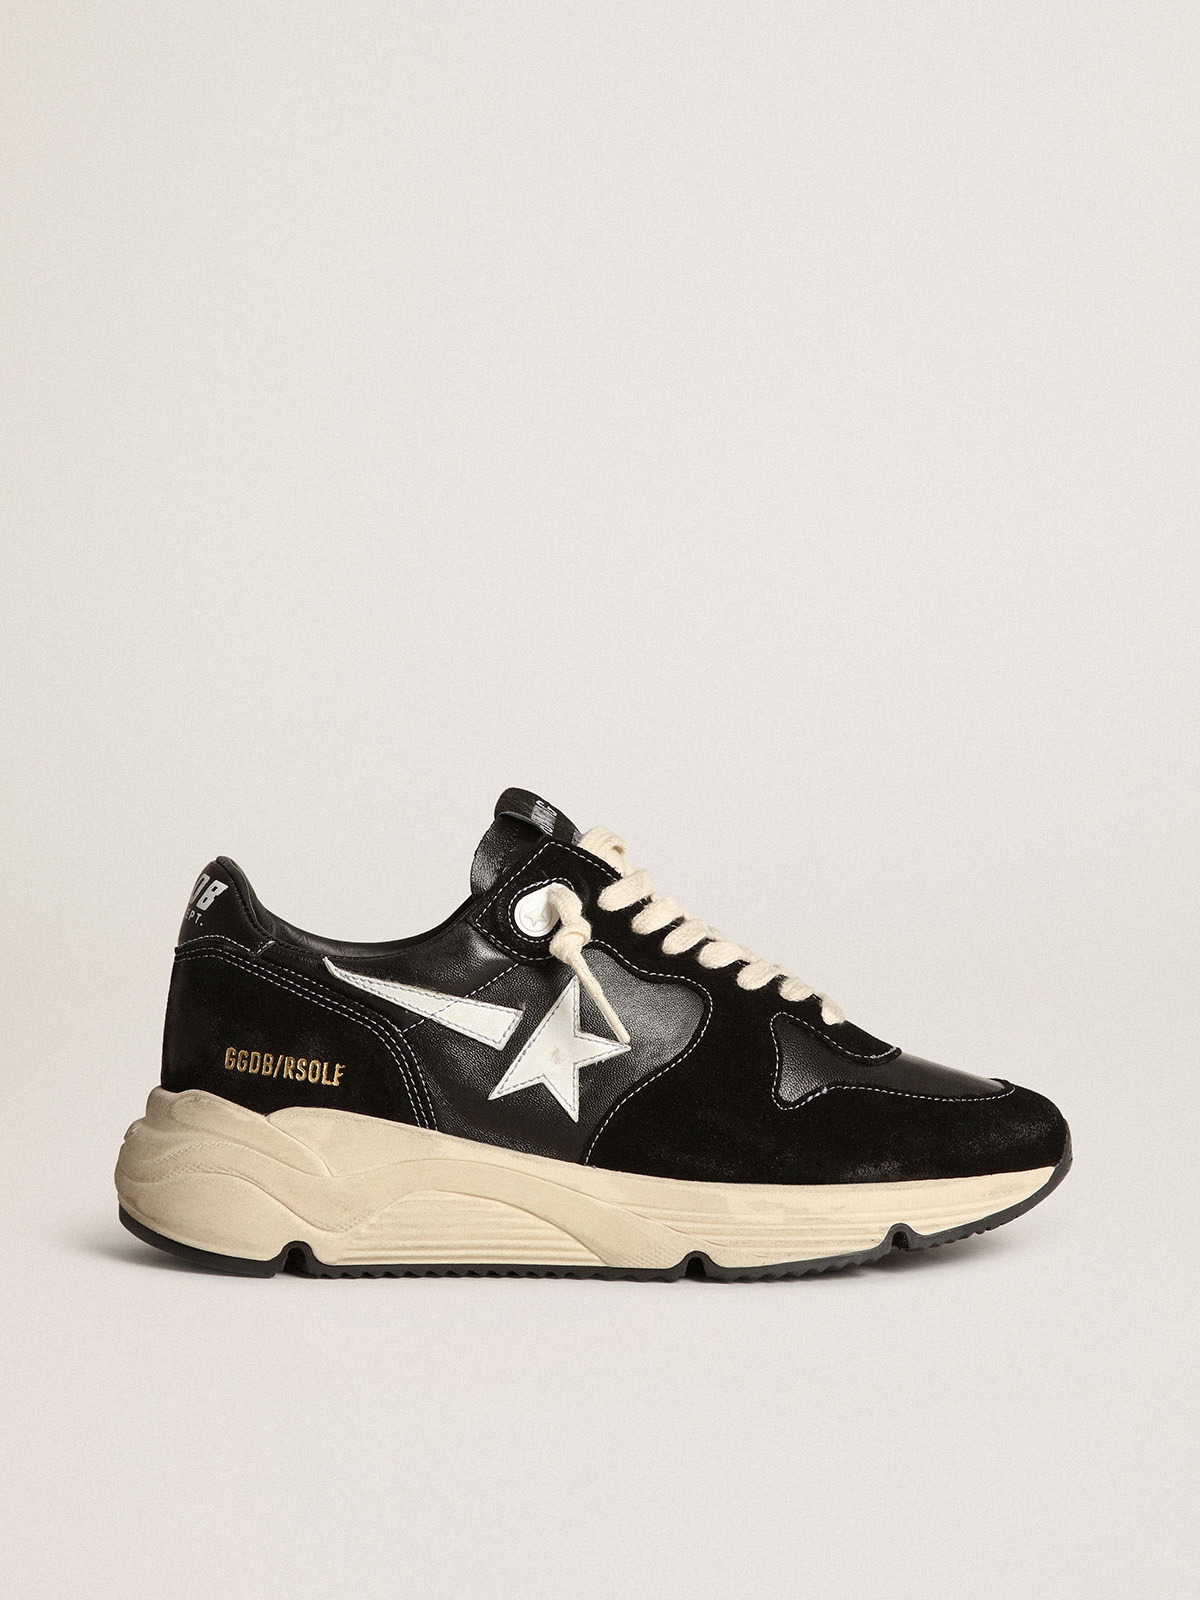 Men\'s Running Sole in black nappa leather and suede with a white star |  Golden Goose